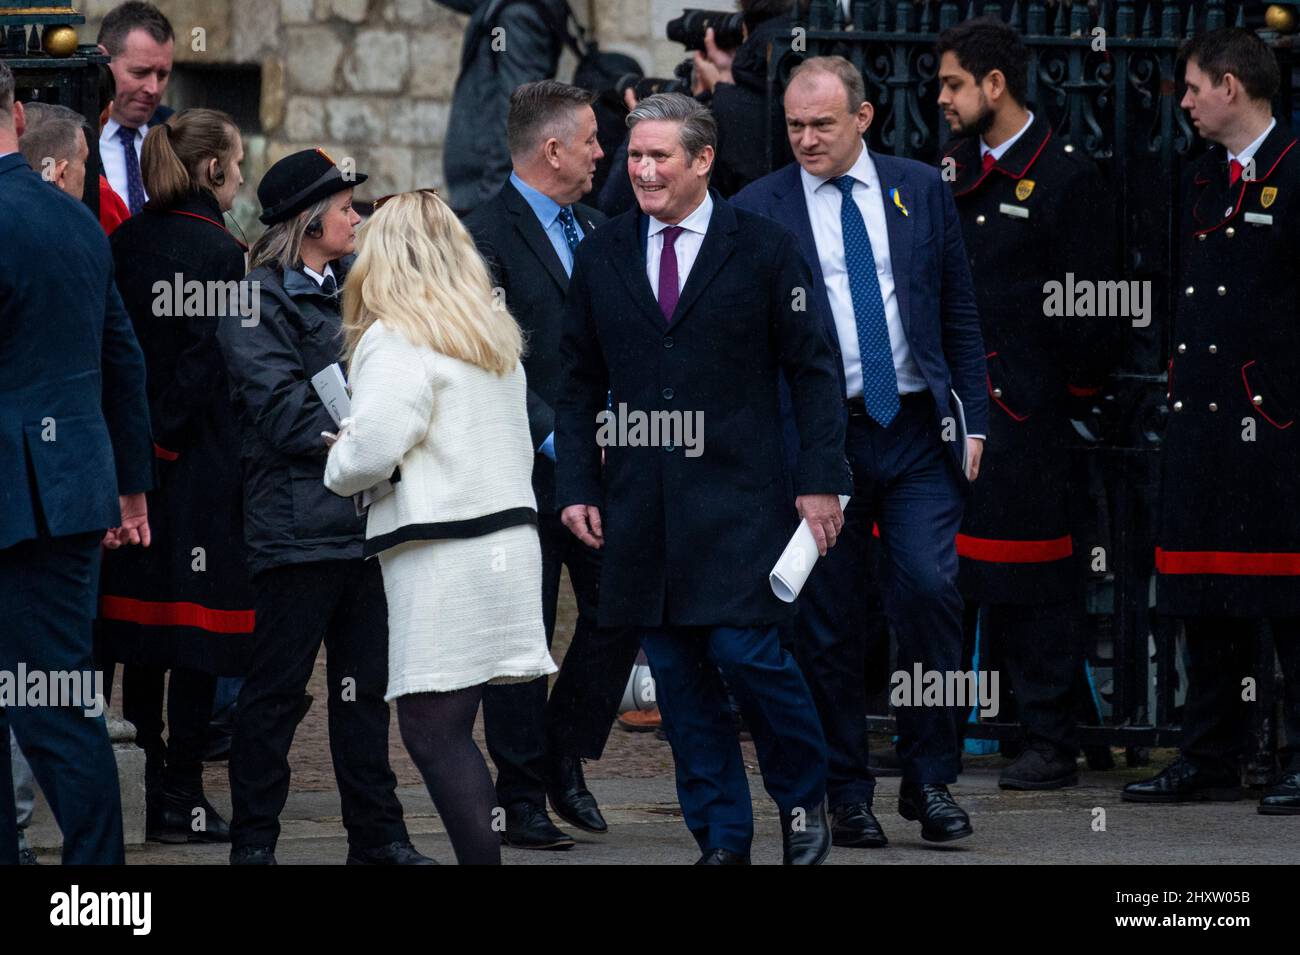 London, UK.  14 March 2022. Keir Starmer, Leader of the Labour party, and Ed Davey, Leader of theLeader of the Liberal Democrats, leave The Commonwealth Service at Westminster Abbey which has been held since 1972 and celebrates the people and cultures of the 54 Commonwealth nations.  The Queen, who recently recovered from Covid-19, did not attend and the Prince of Wales represented her.  Credit: Stephen Chung / Alamy Live News Stock Photo